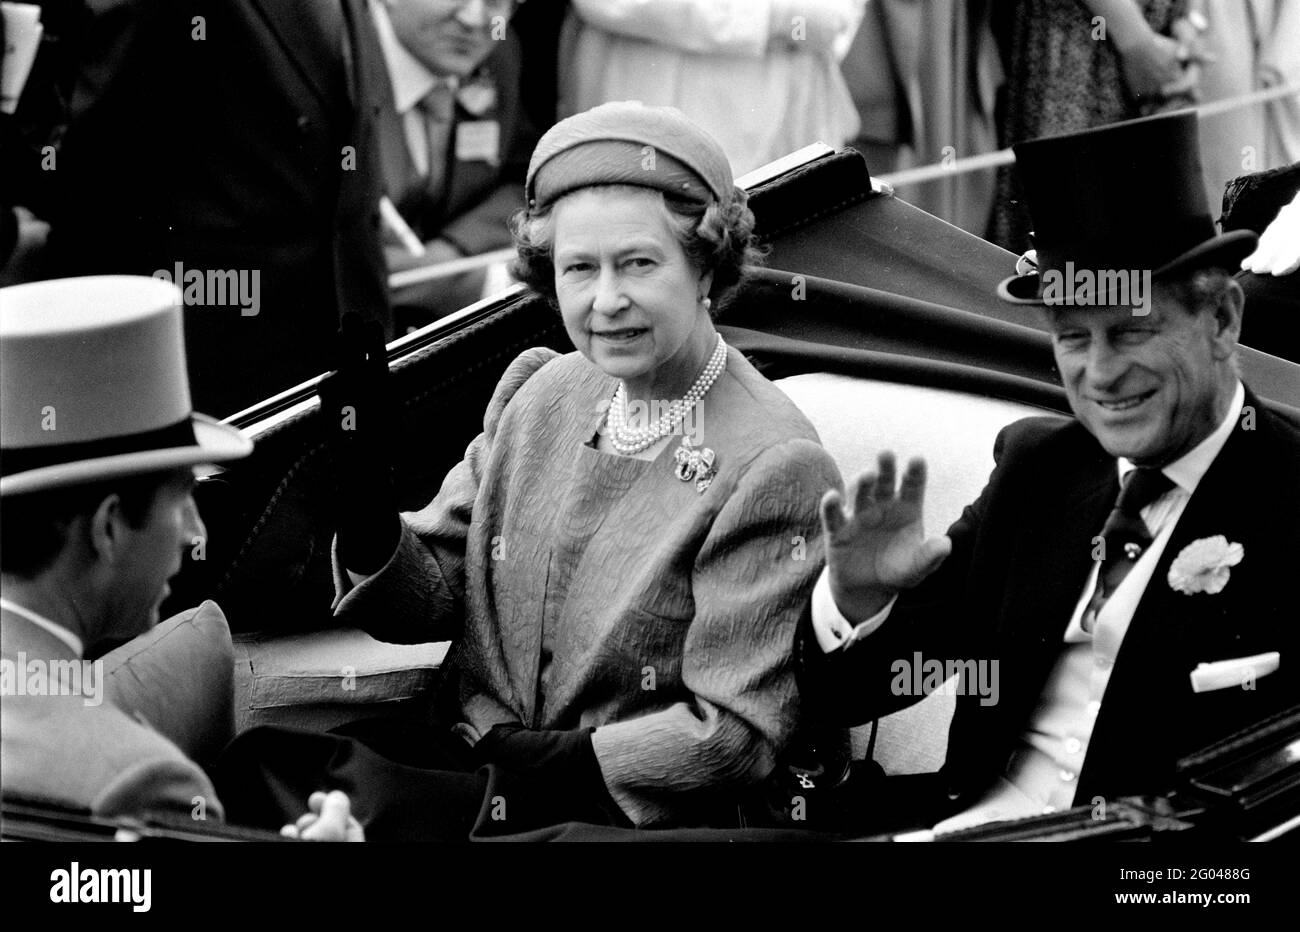 Royal ascot Black and White Stock Photos & Images - Alamy